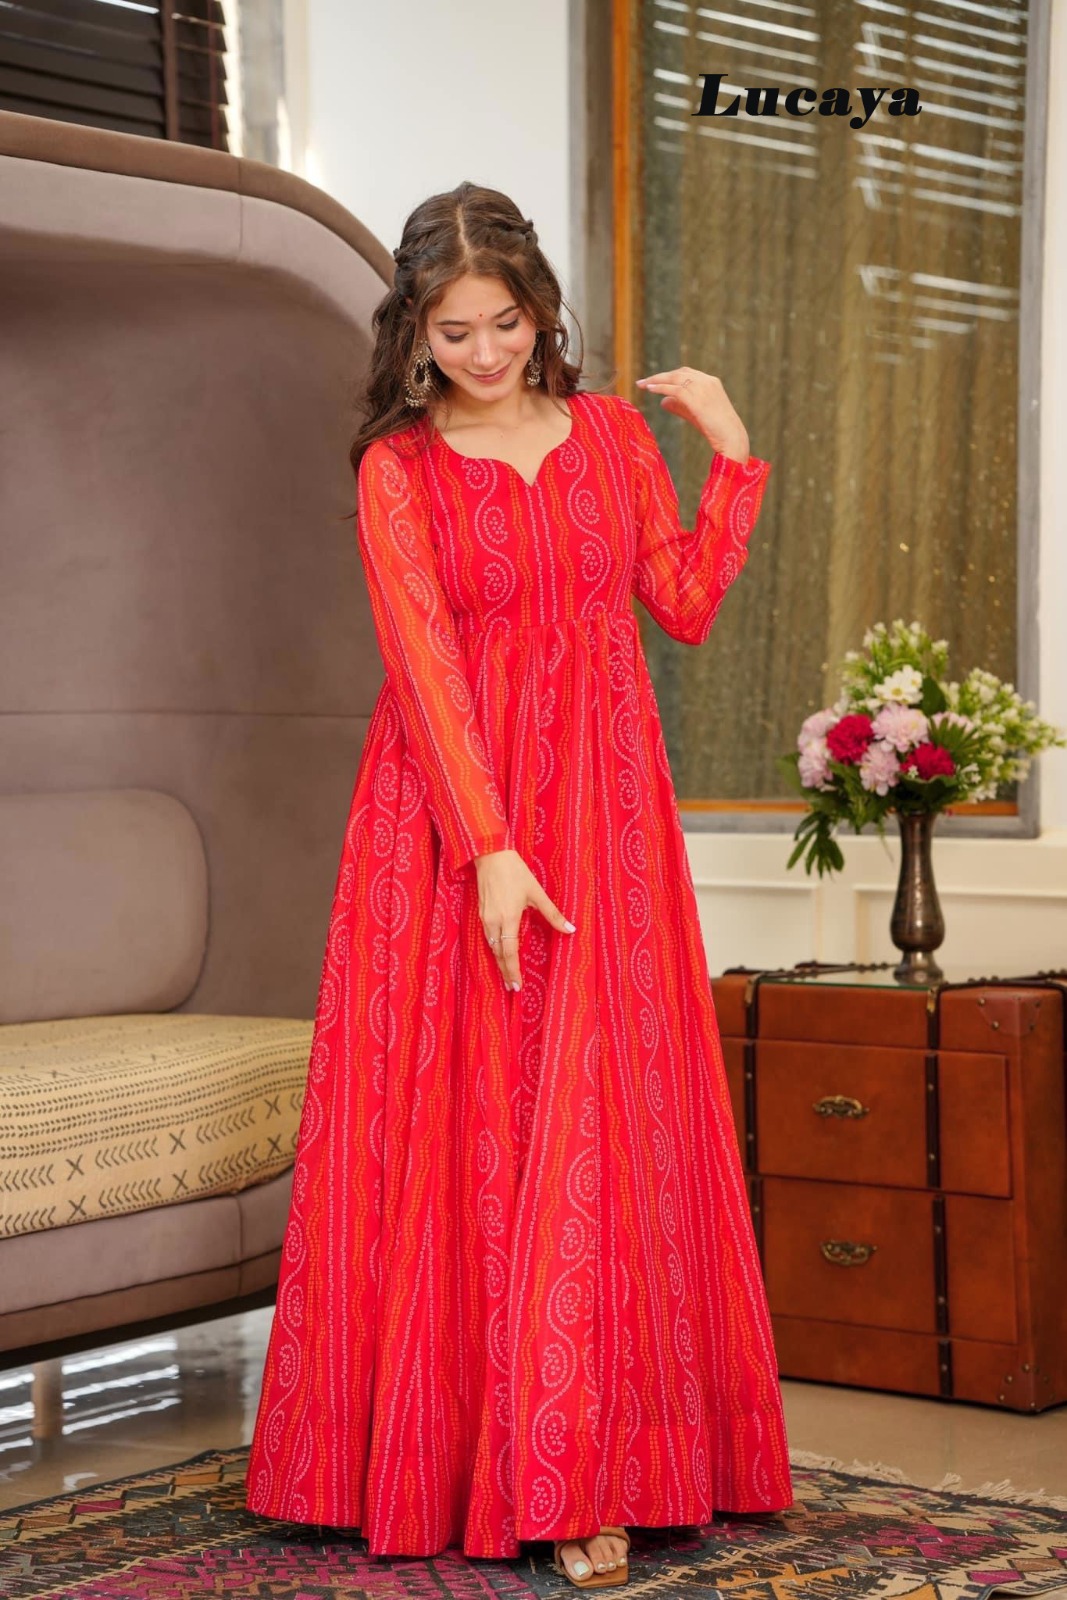 Ethnic Gowns For Women - Buy online trendig partywear ethnic gowns for this  festive season. Designer long kurta for women. - Shop online women fashion,  indo-western, ethnic wear, sari, suits, kurtis, watches,